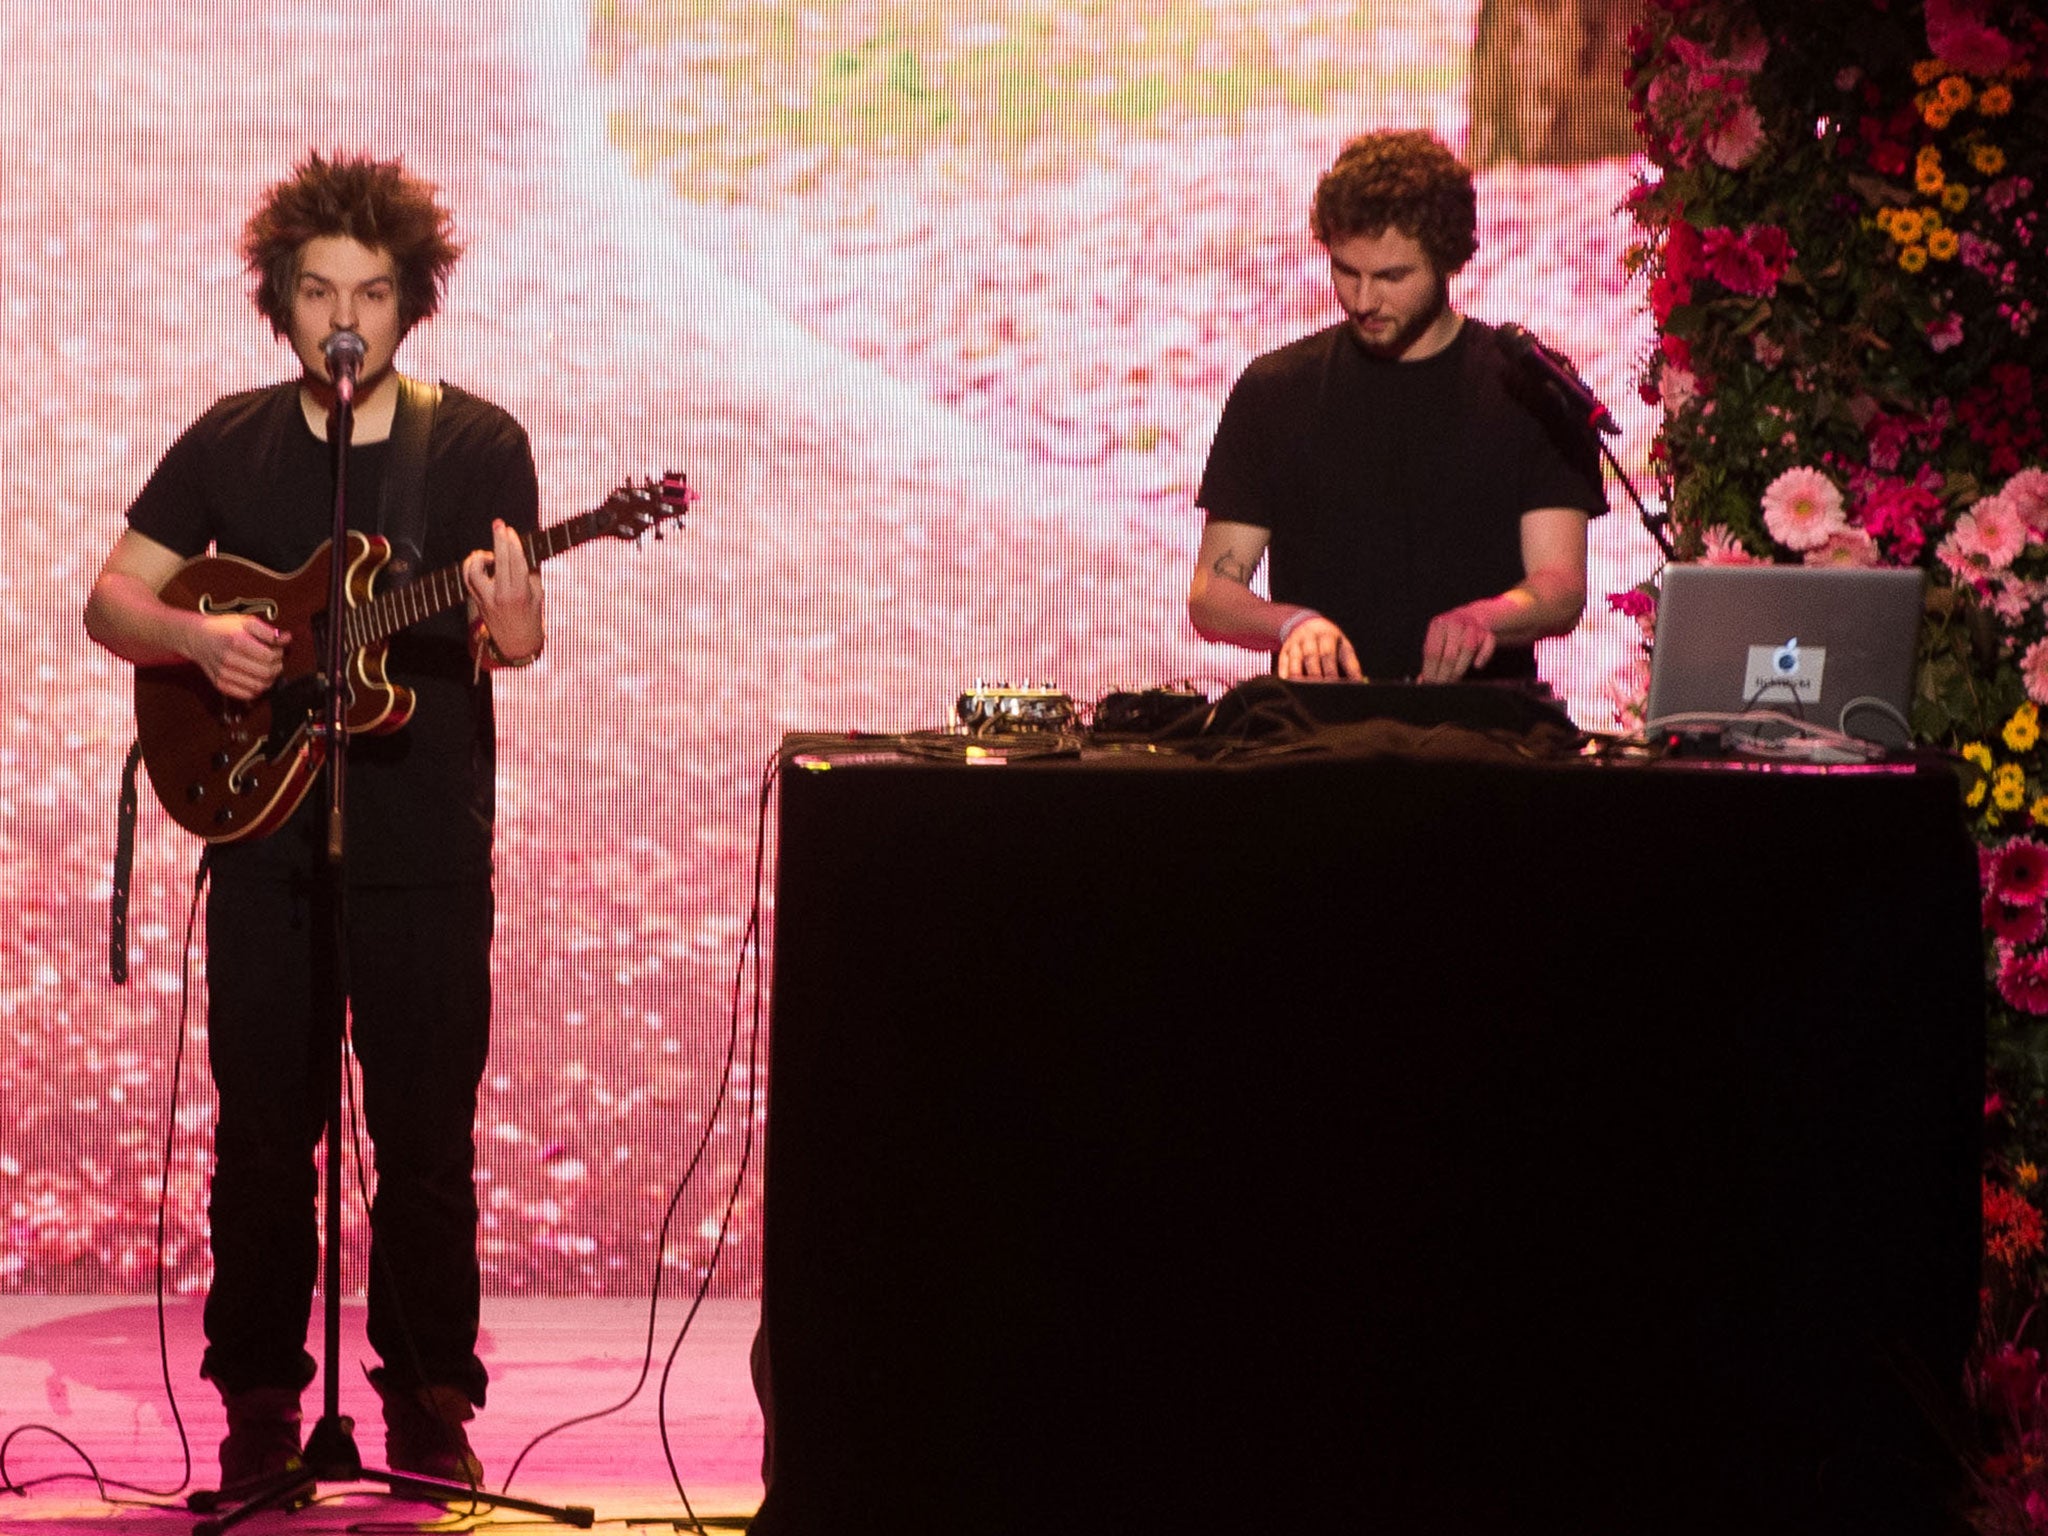 Clemens Rehbein and Philipp Dausch of Milky Chance, here seen performing during Mercedes-Benz Fashion Week in Berlin